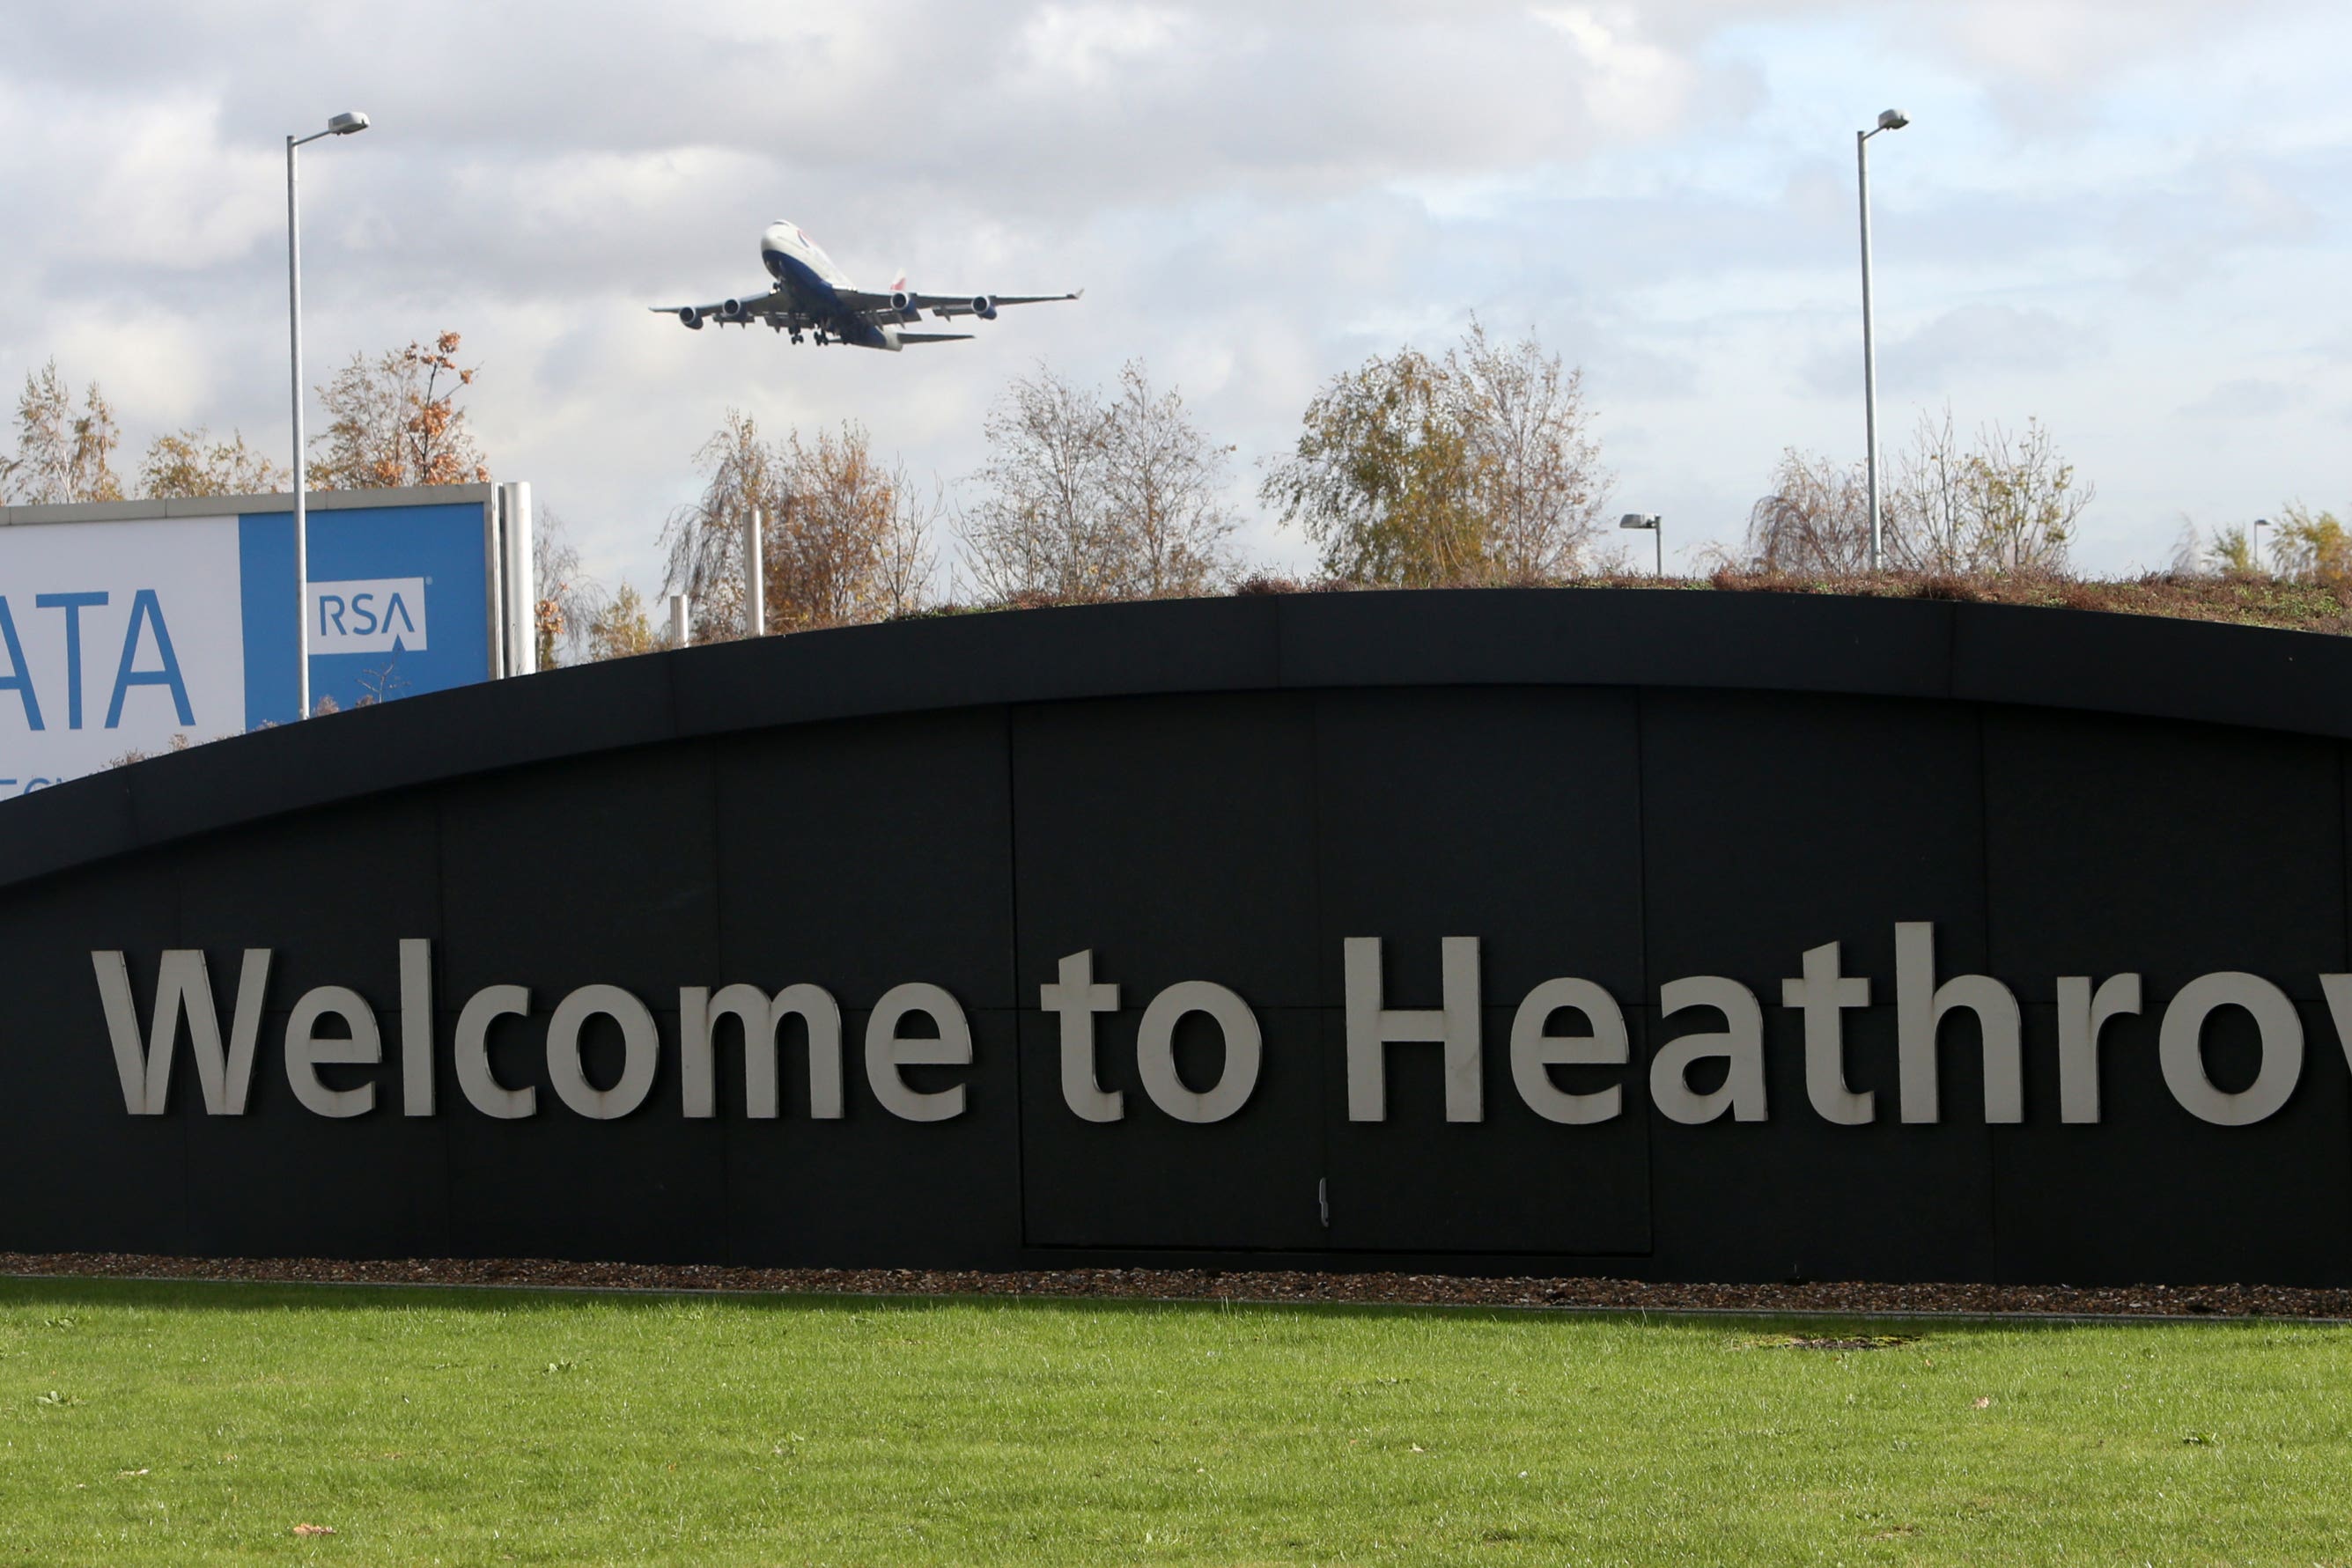 There could be long queues at Heathrow Airport when thousands of families after trying to get away for their holidays